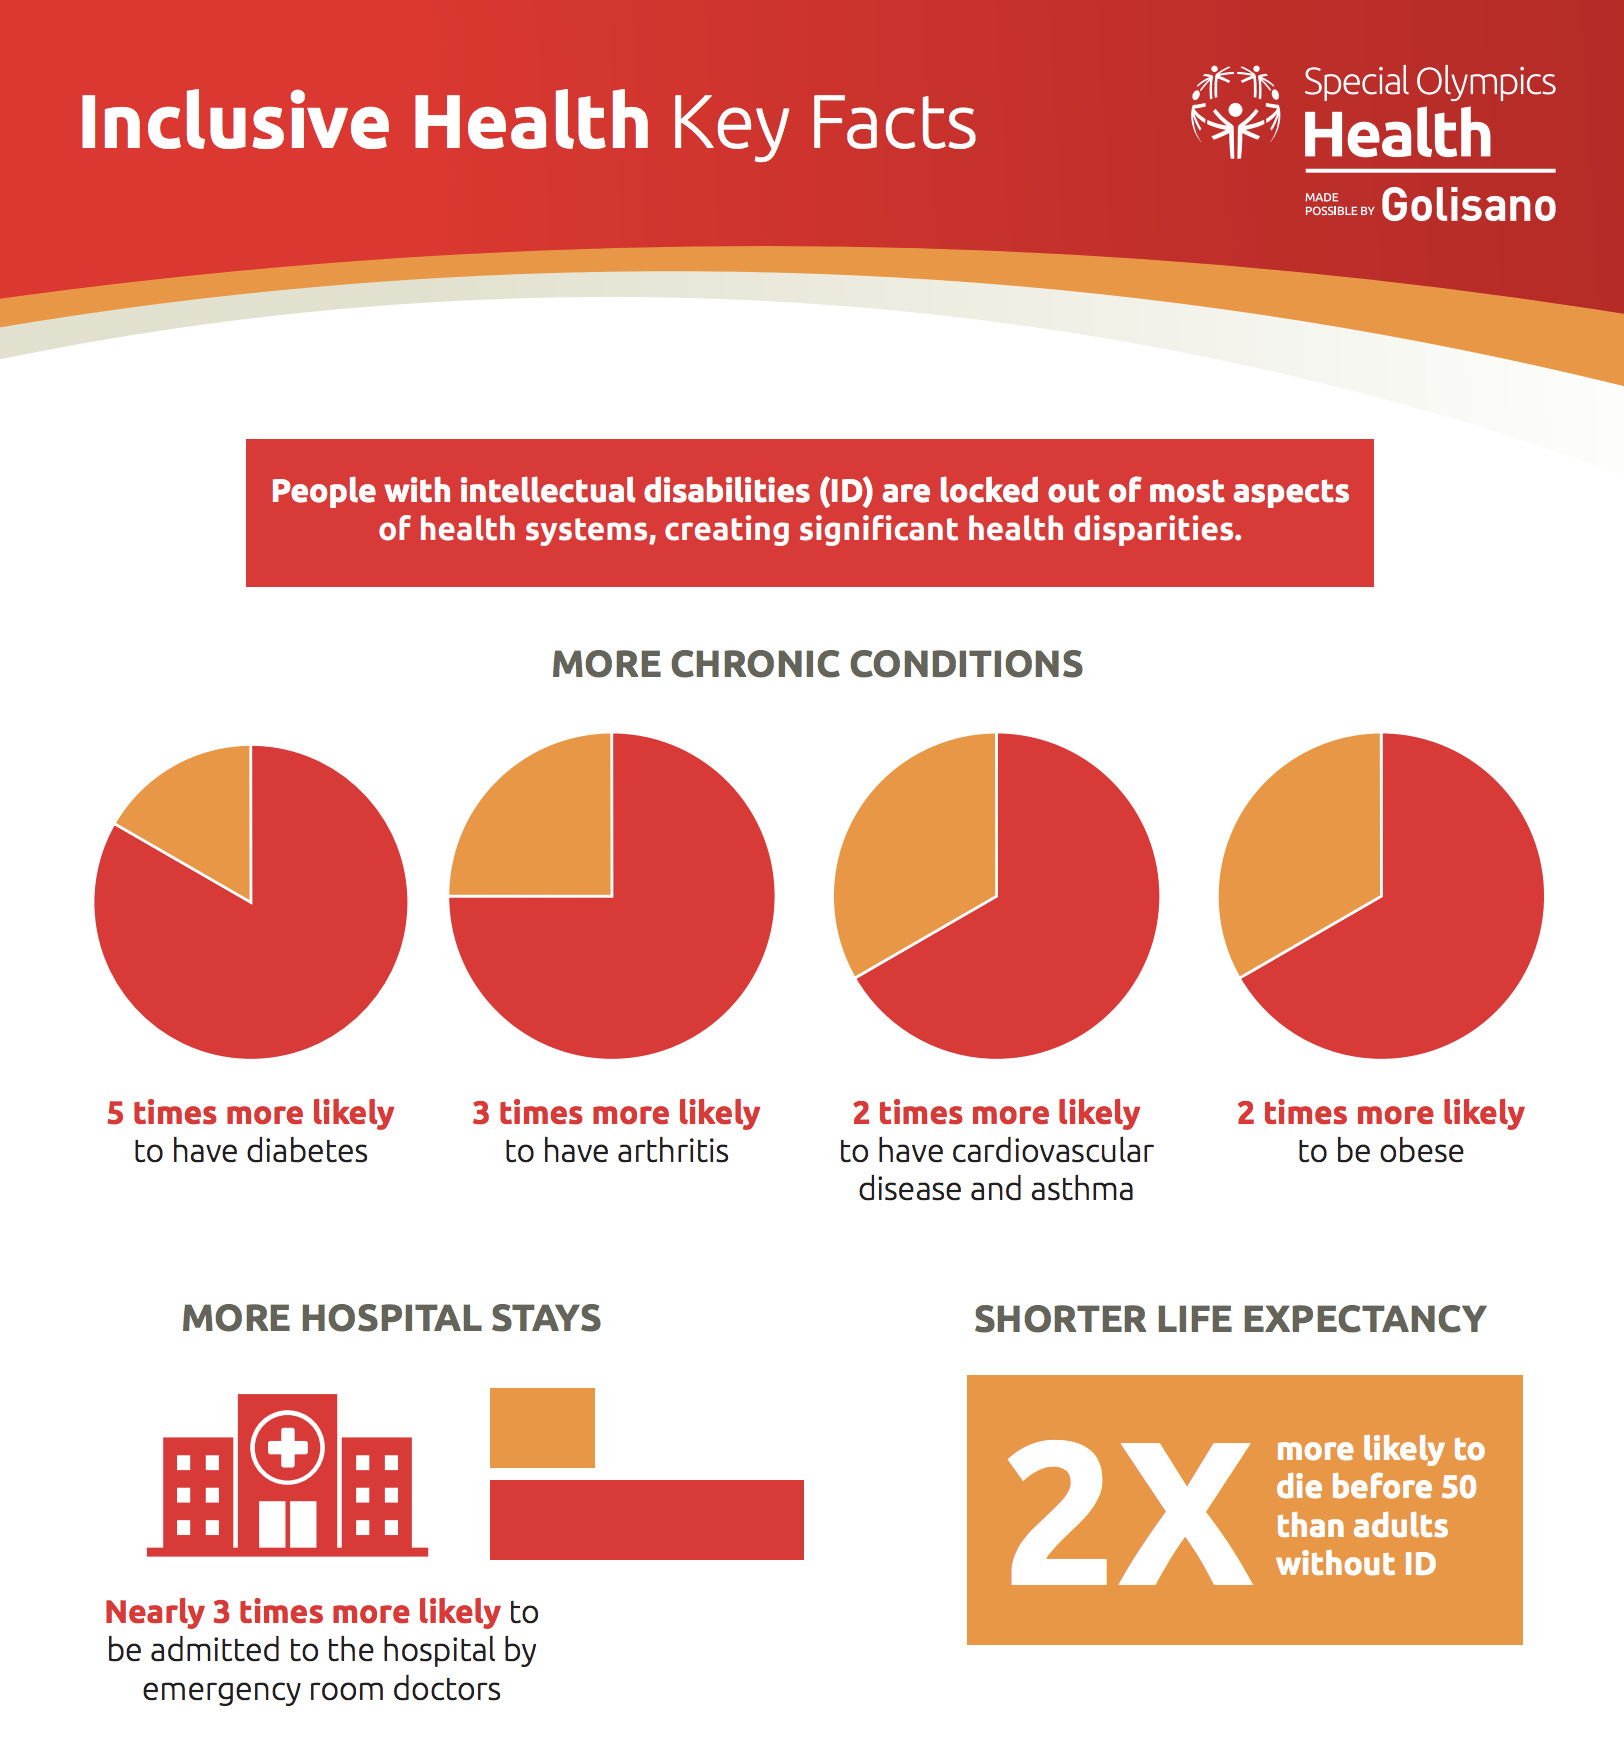 Key facts on health disparities for people with IDD